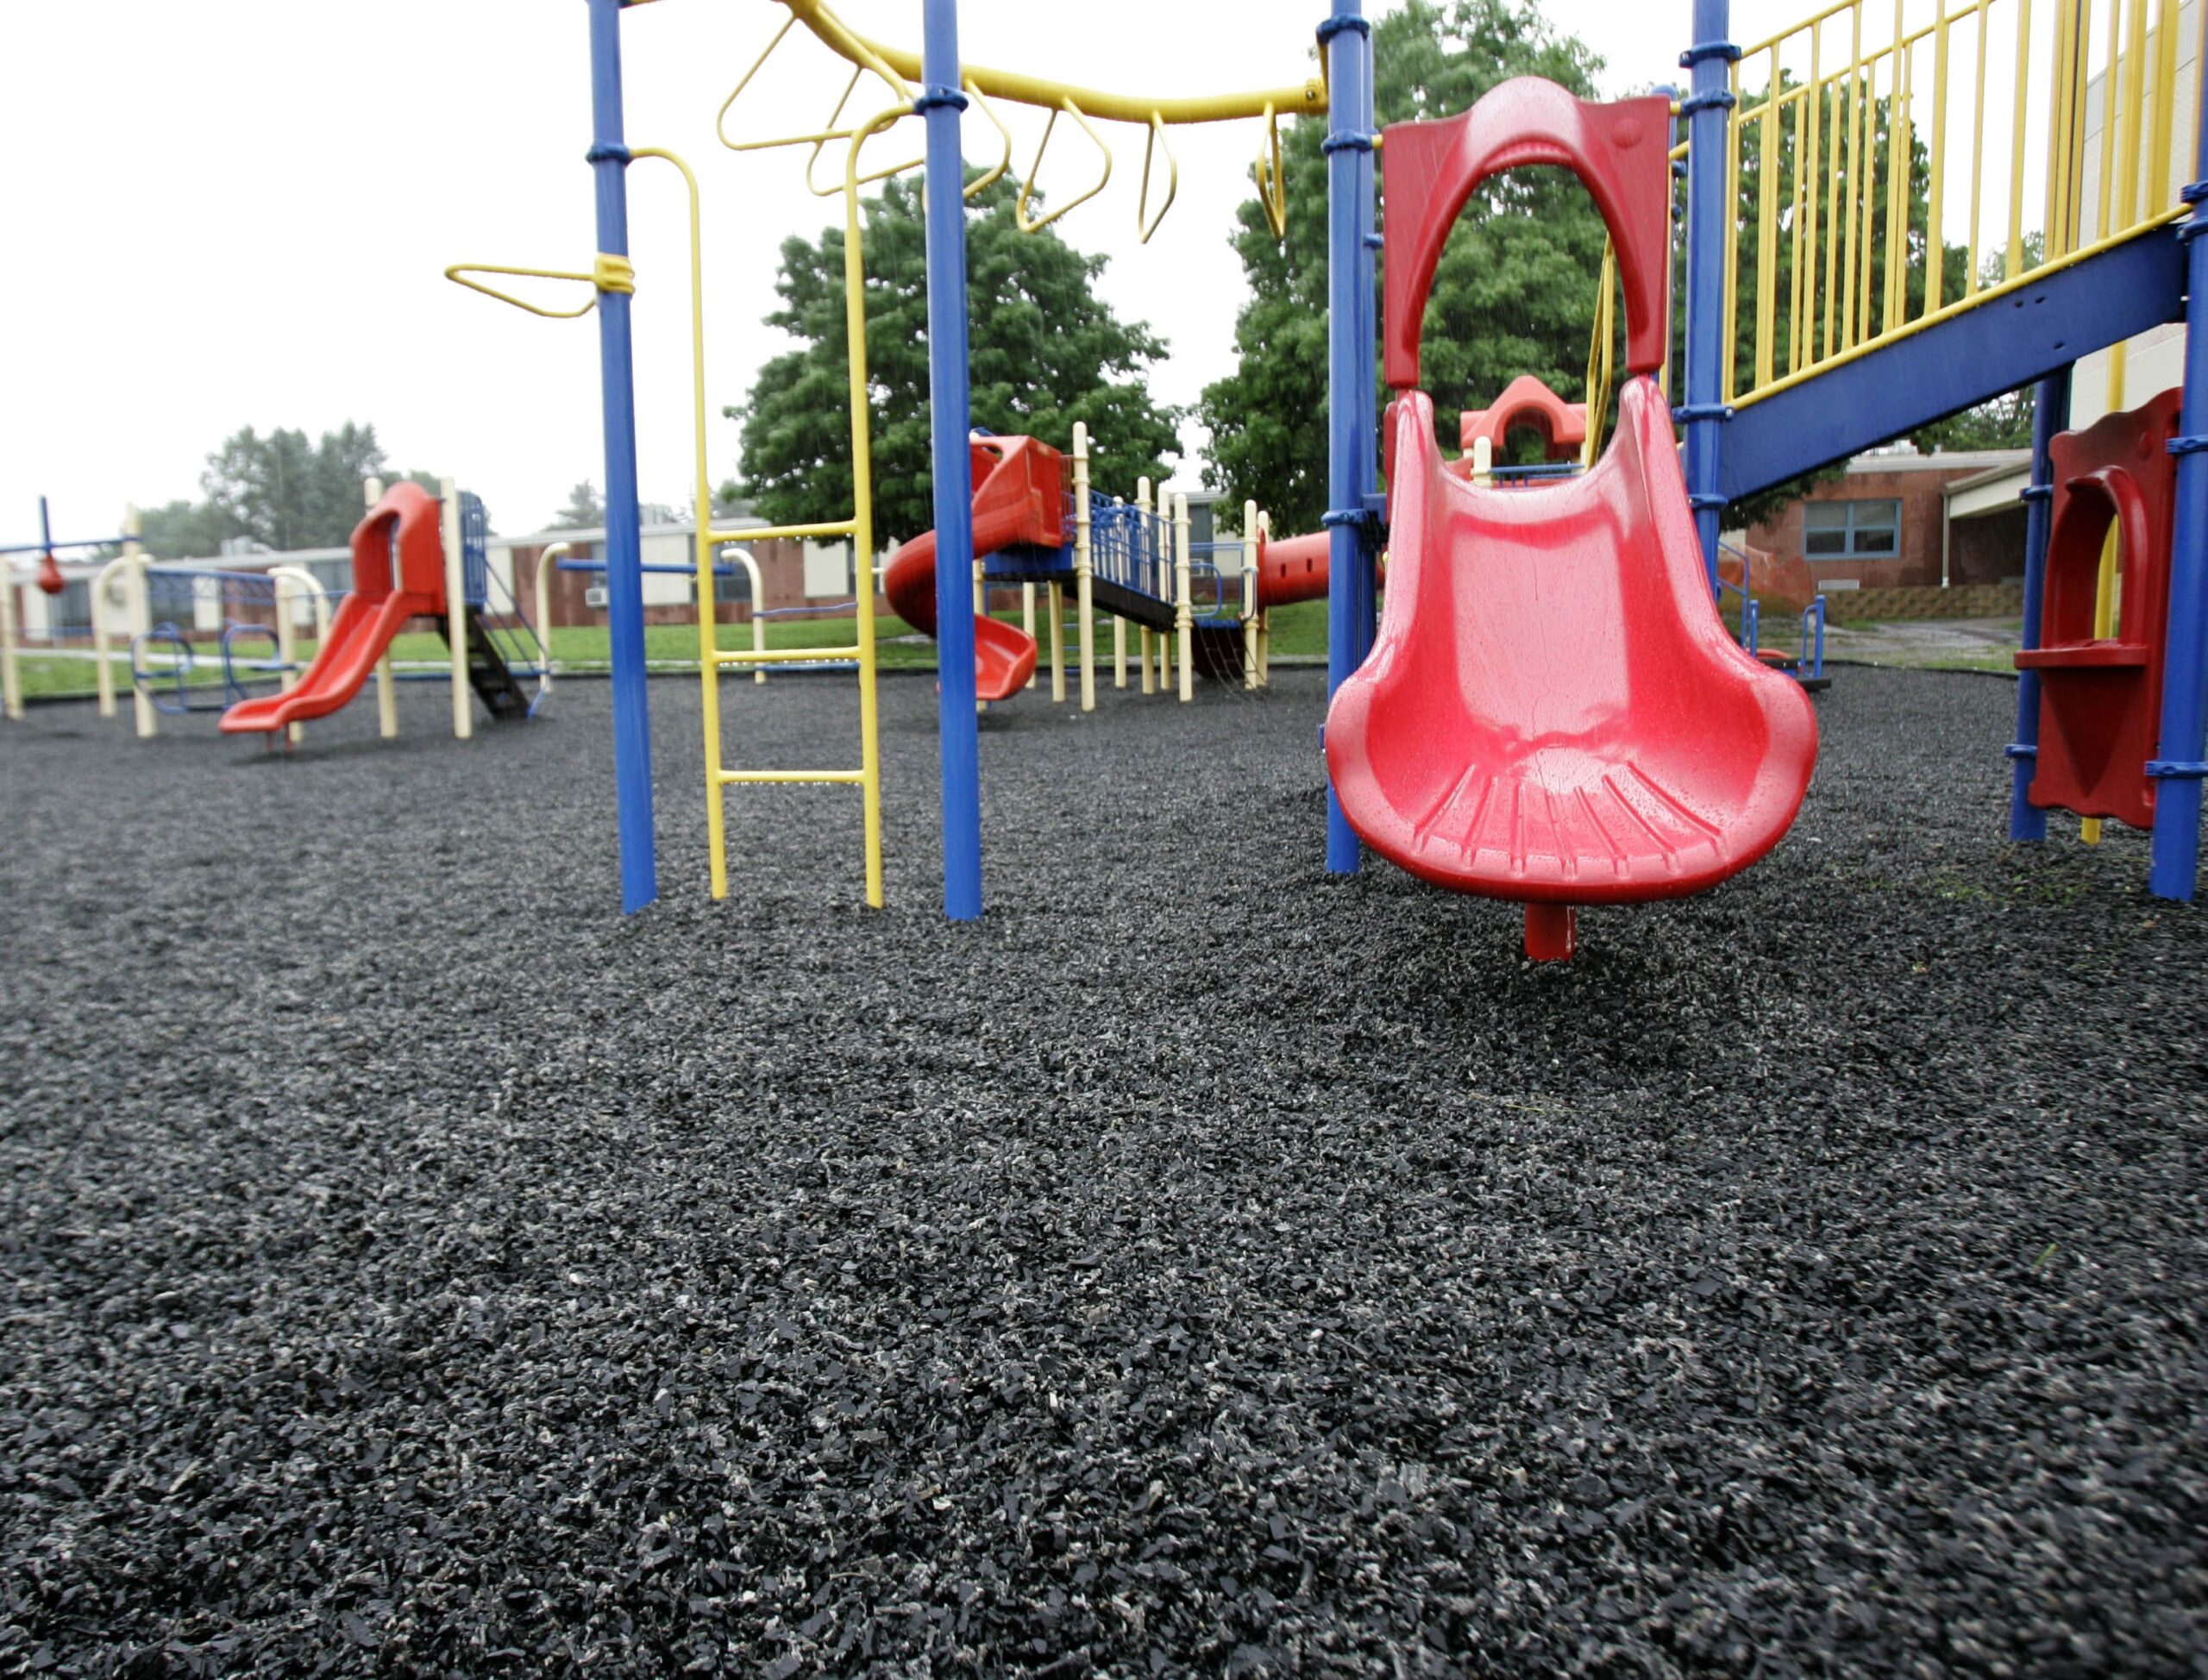 playground at an elementary school